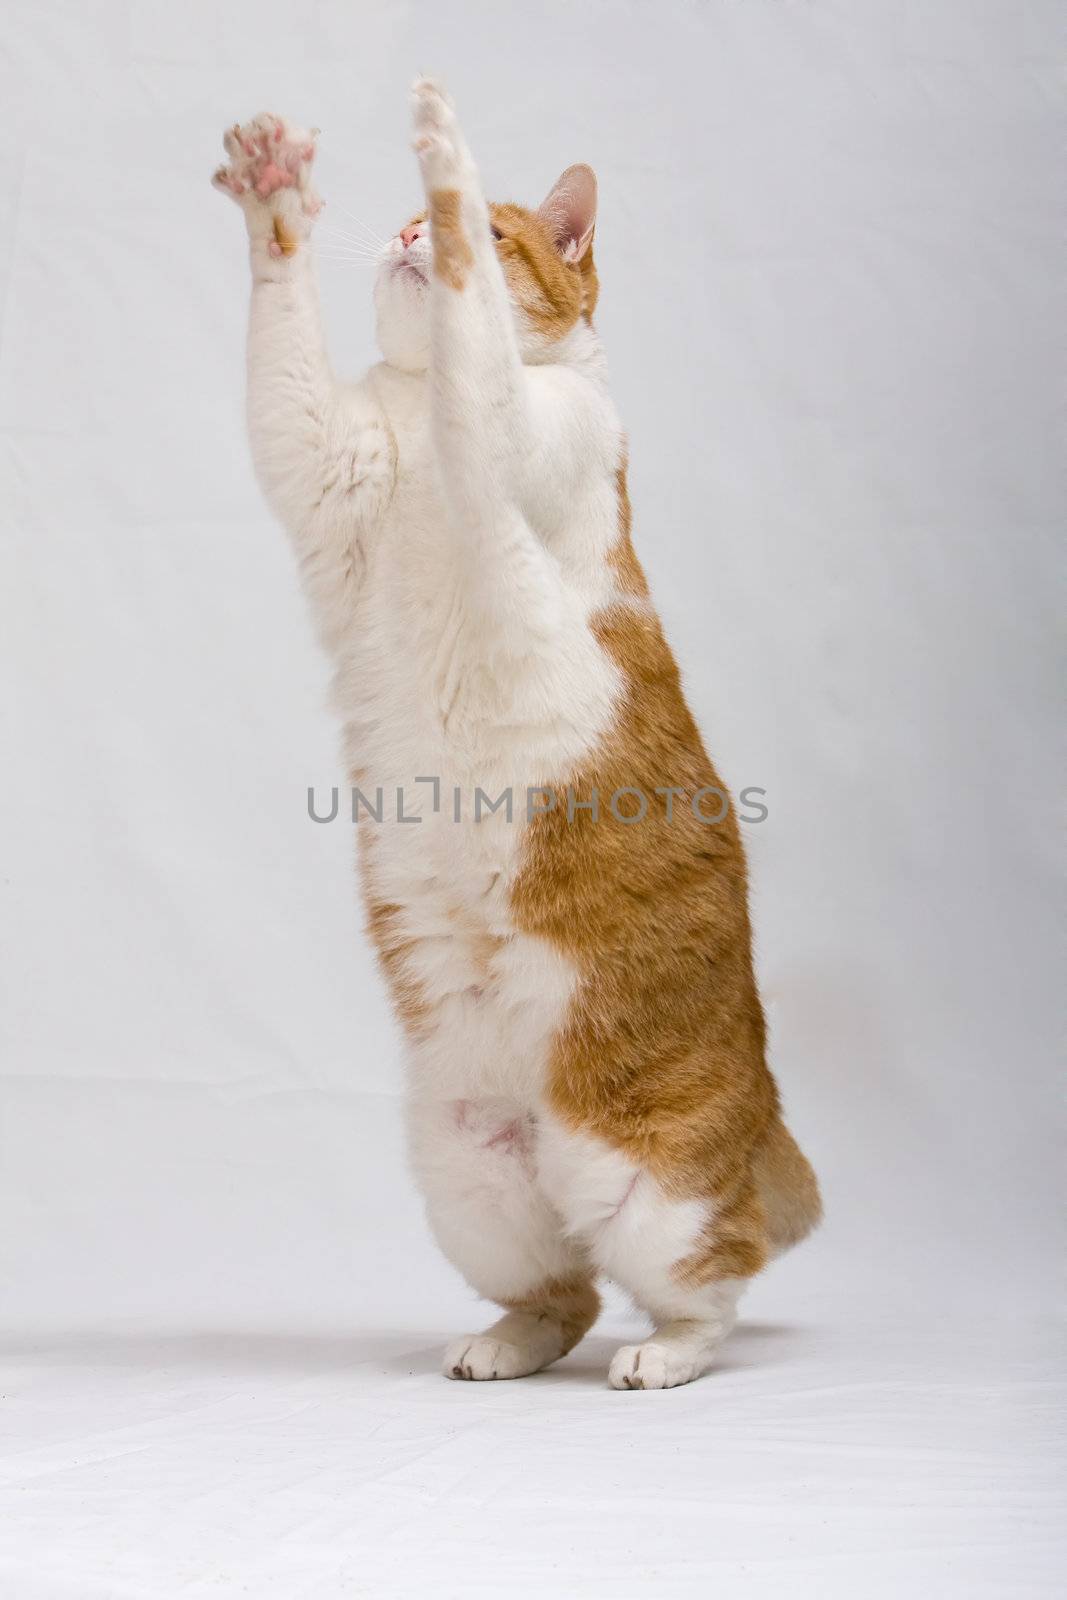 White with orange cat standing and trying to grab something, isolated on white